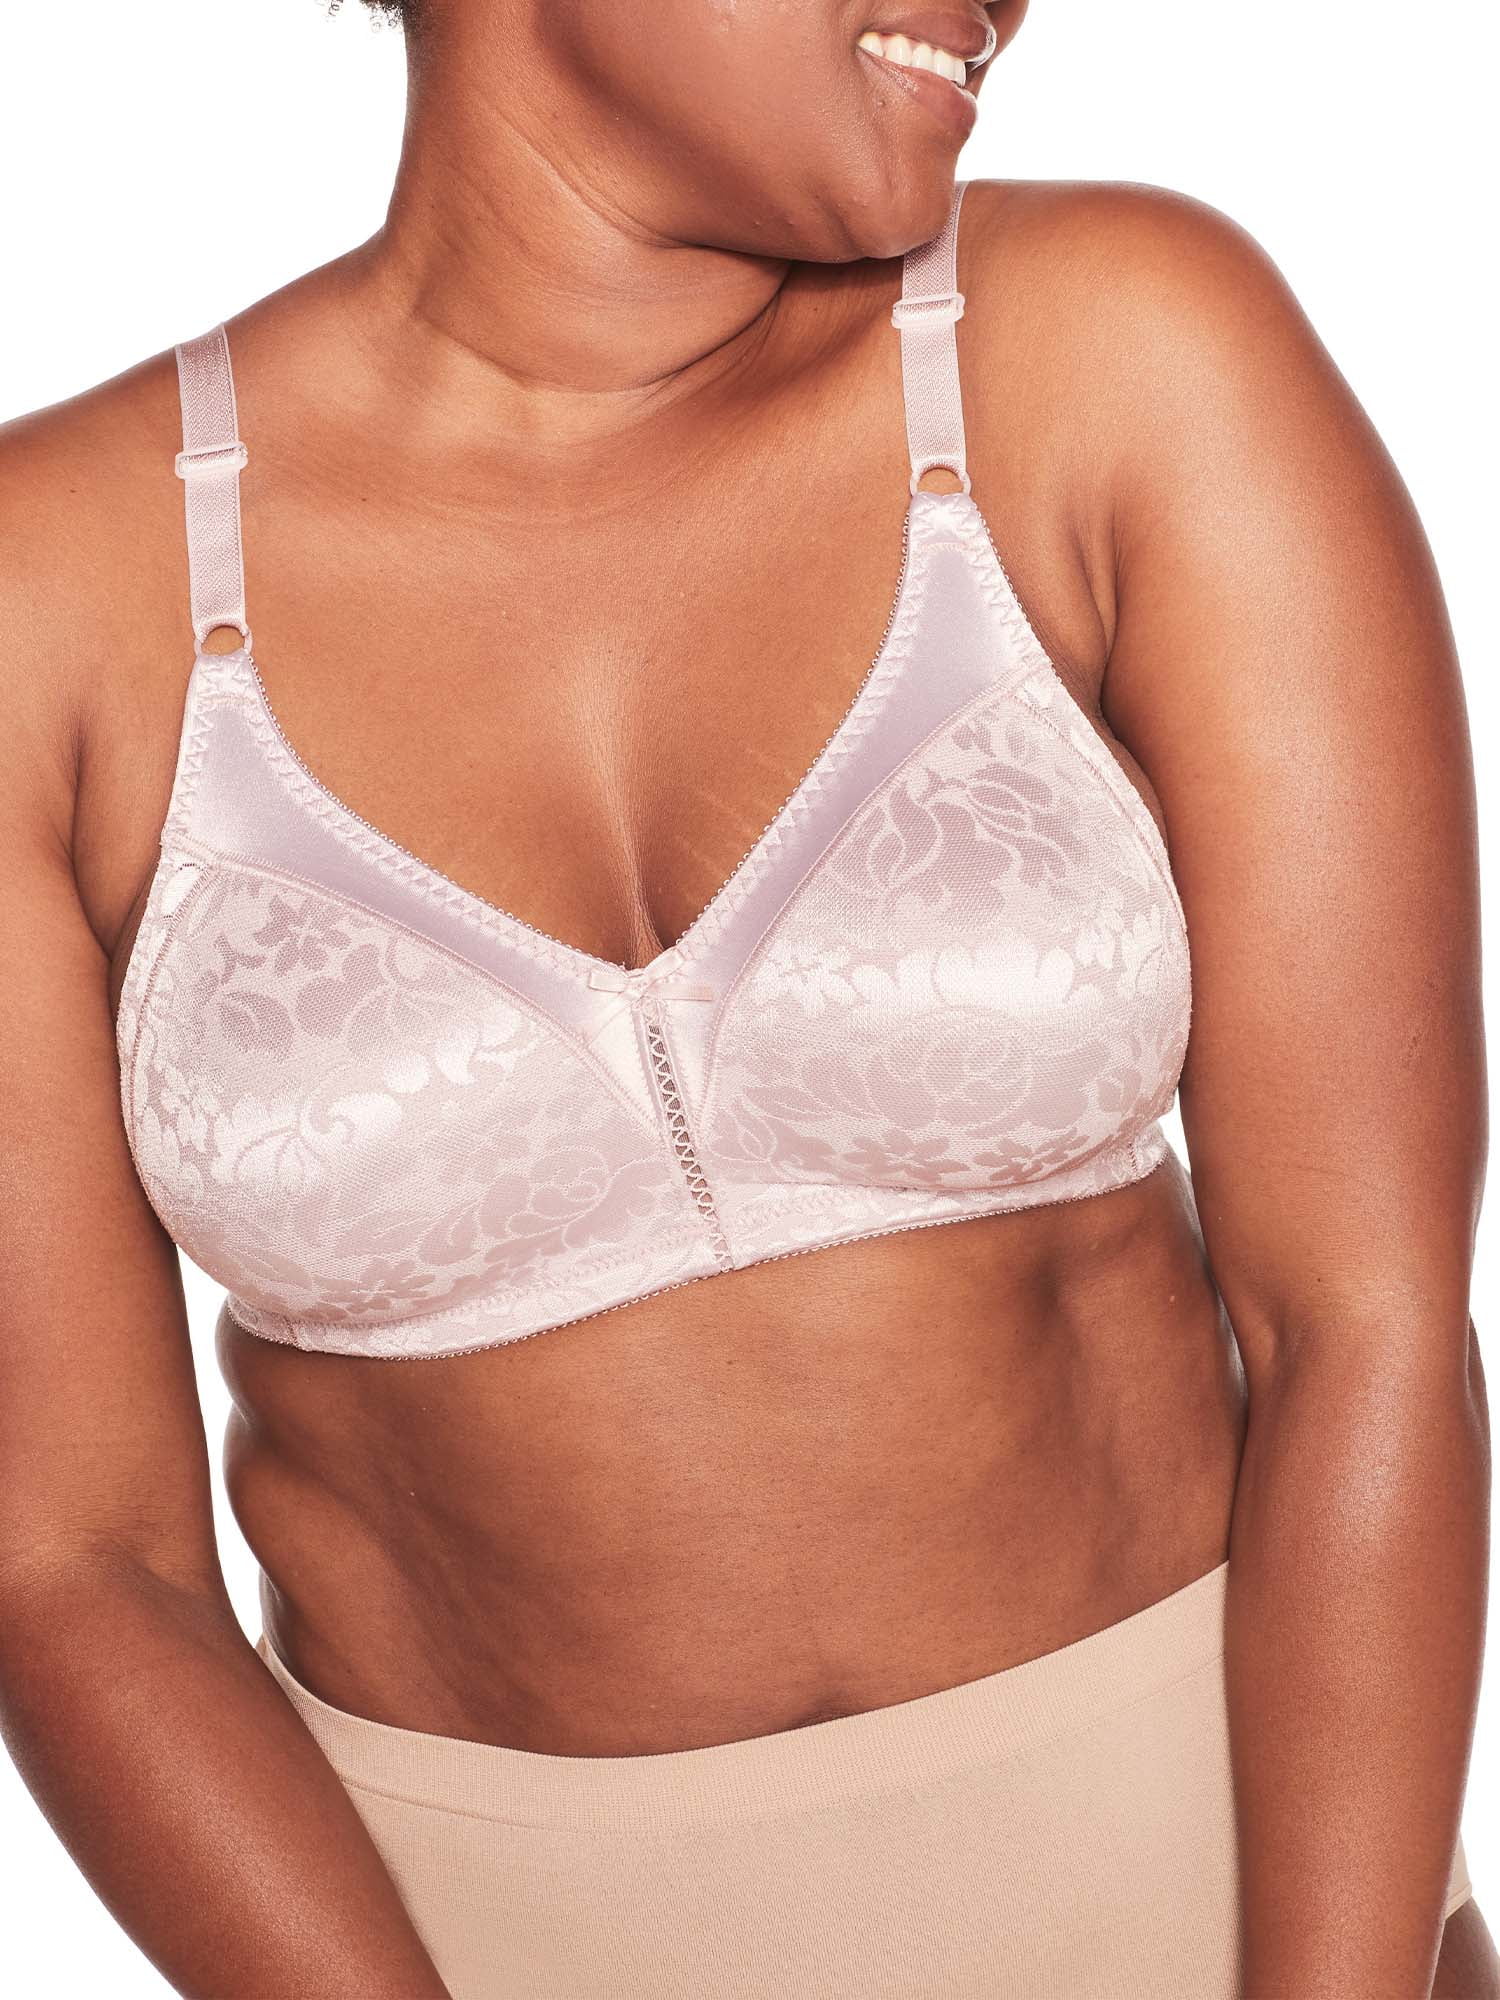 Double Support Lace Wirefree Spa Closure Bra Private Jet 40C